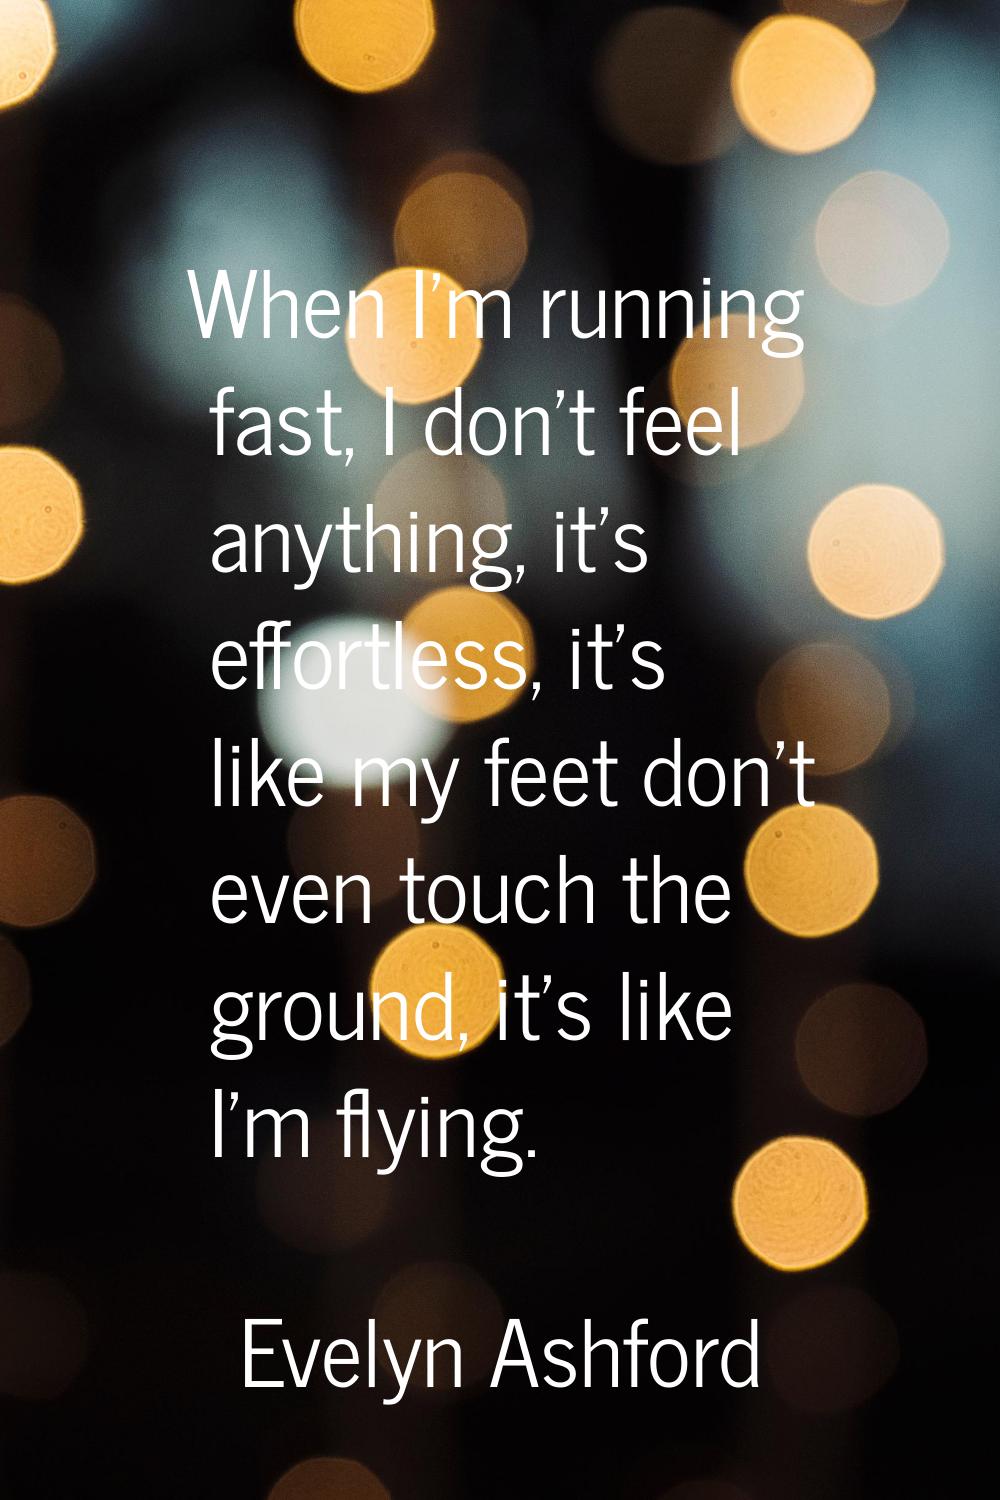 When I'm running fast, I don't feel anything, it's effortless, it's like my feet don't even touch t